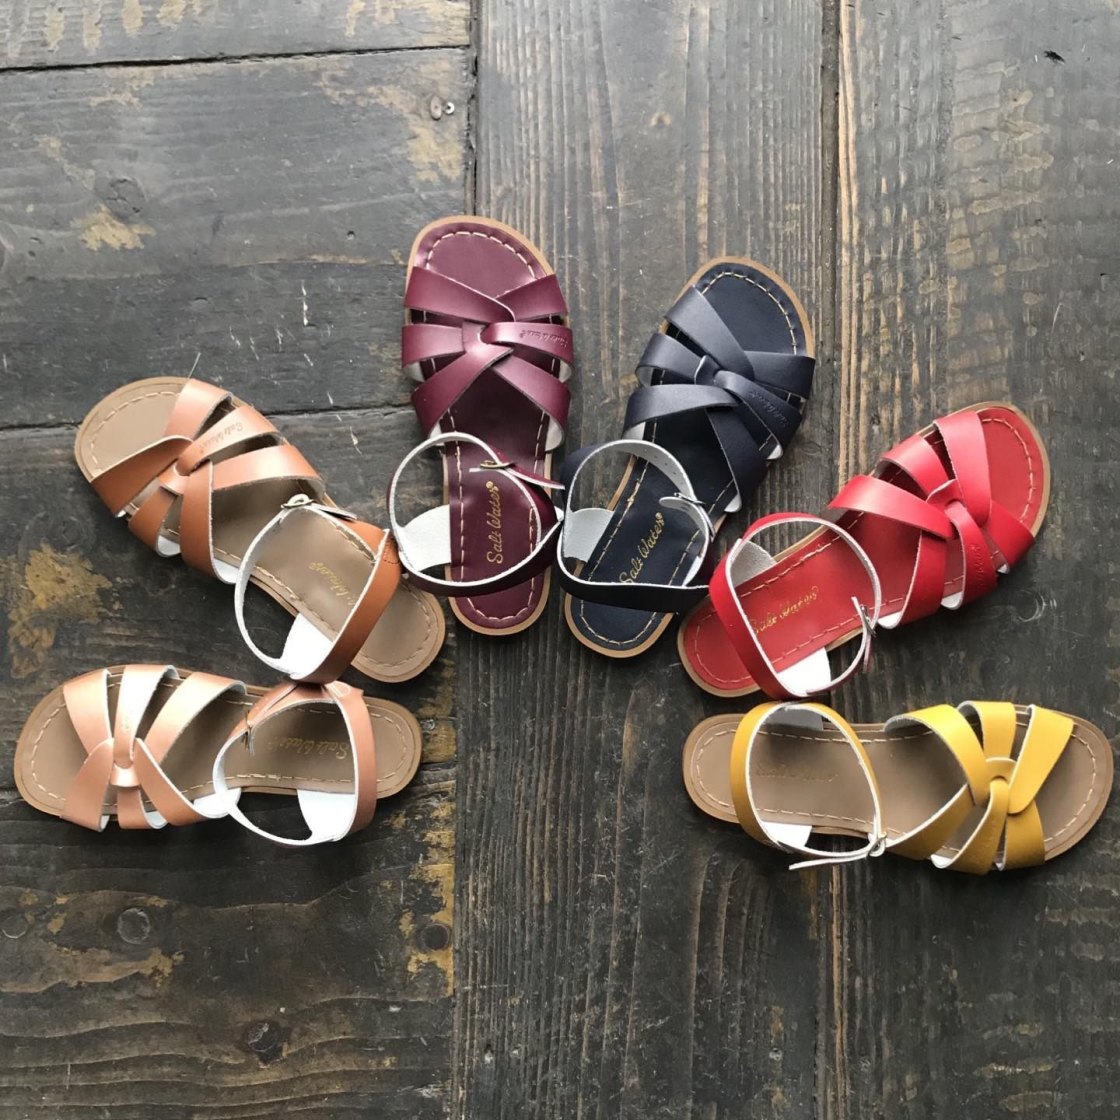 Salt-Water Sandals for Different Occasions - A Style Guide